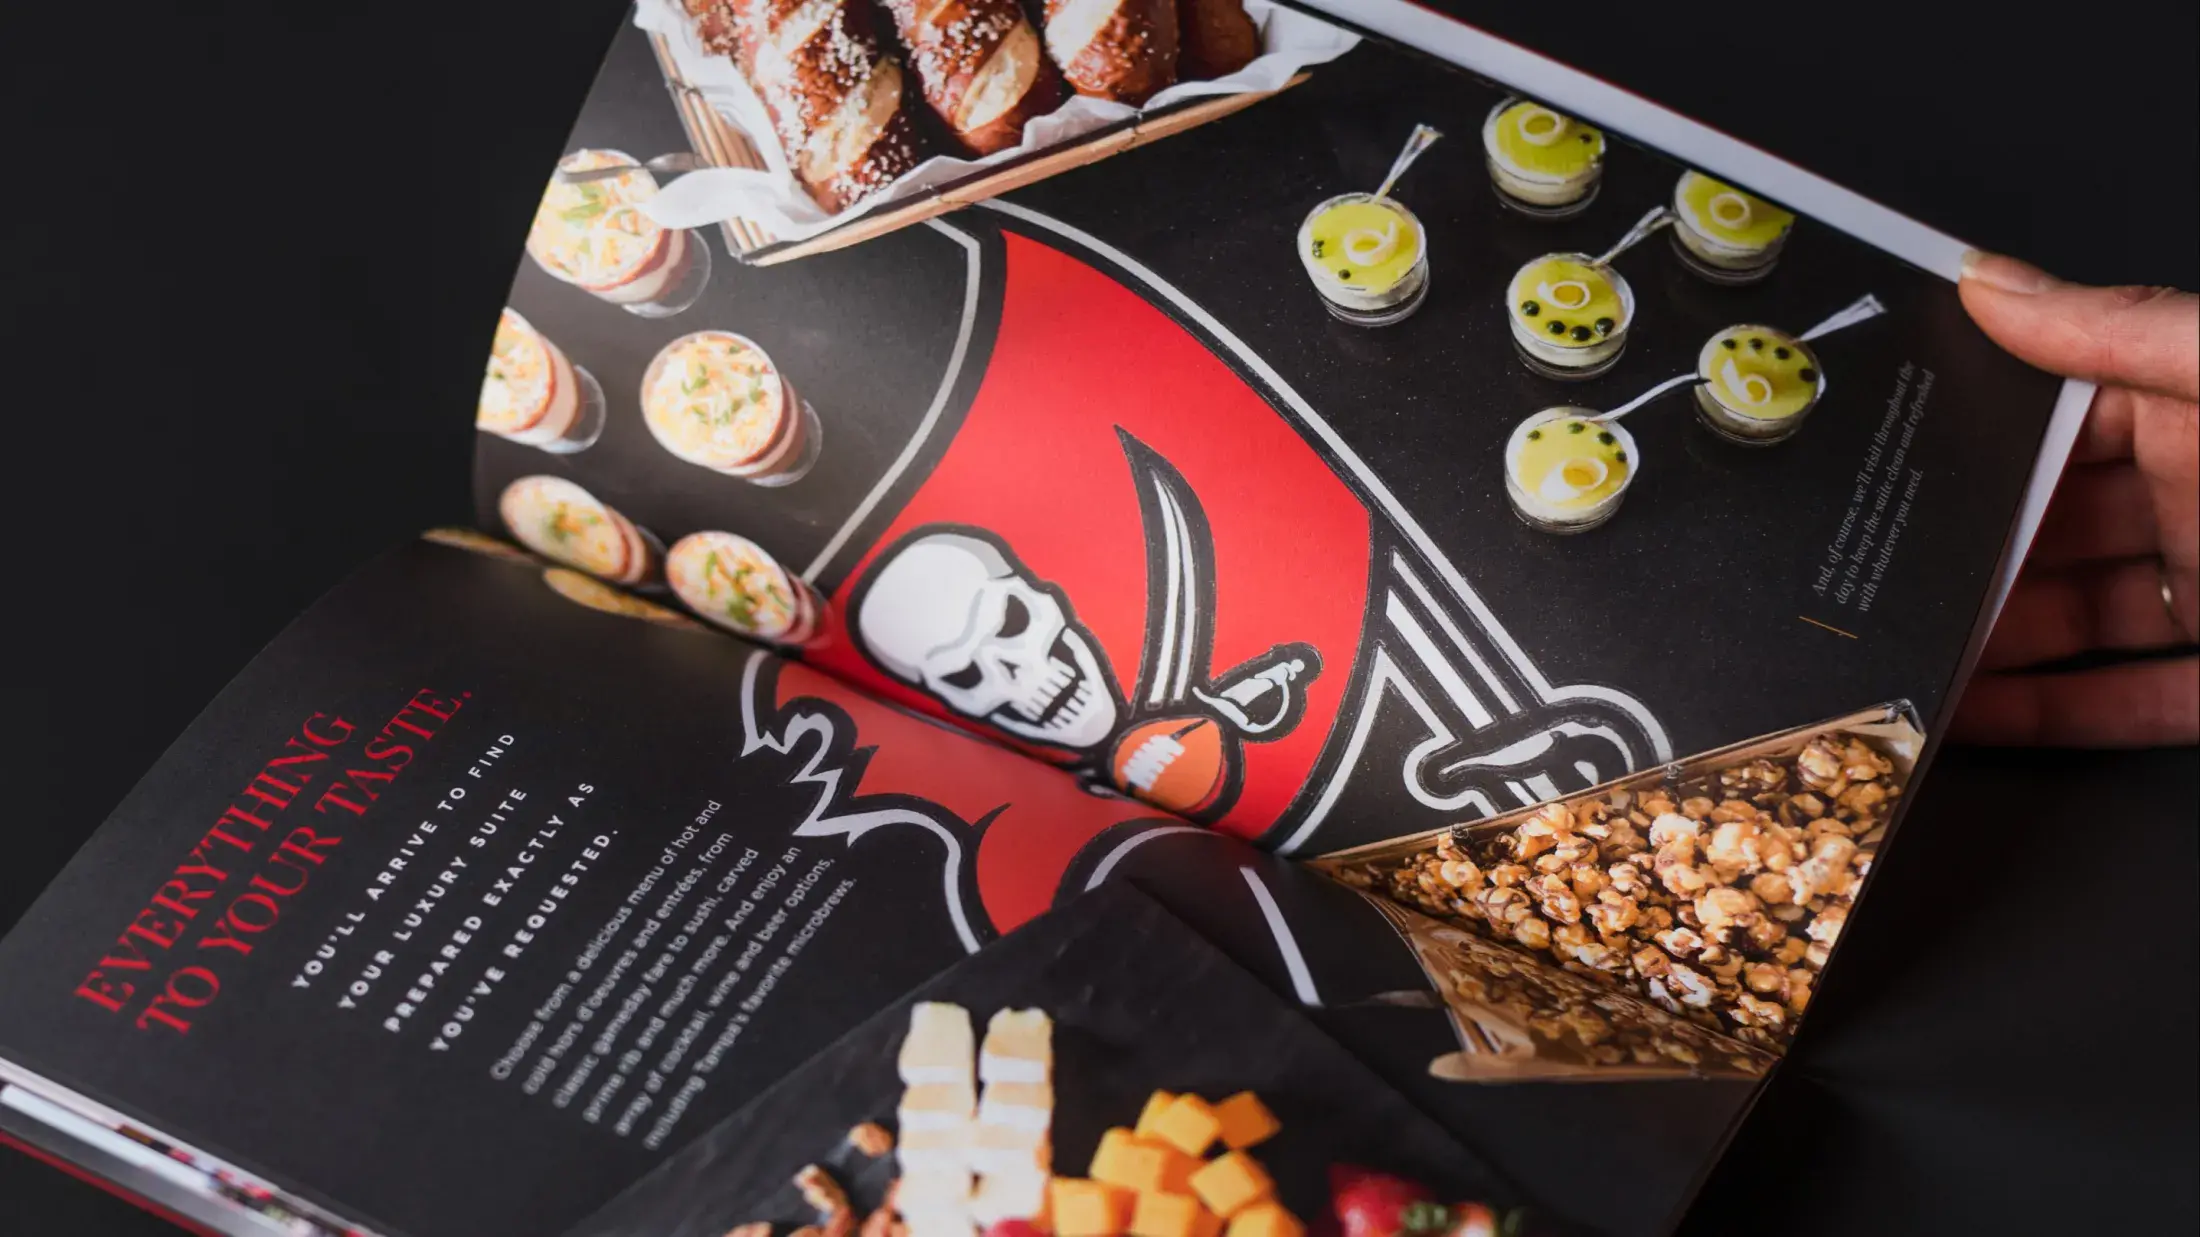 luxury suites booklet with catering options